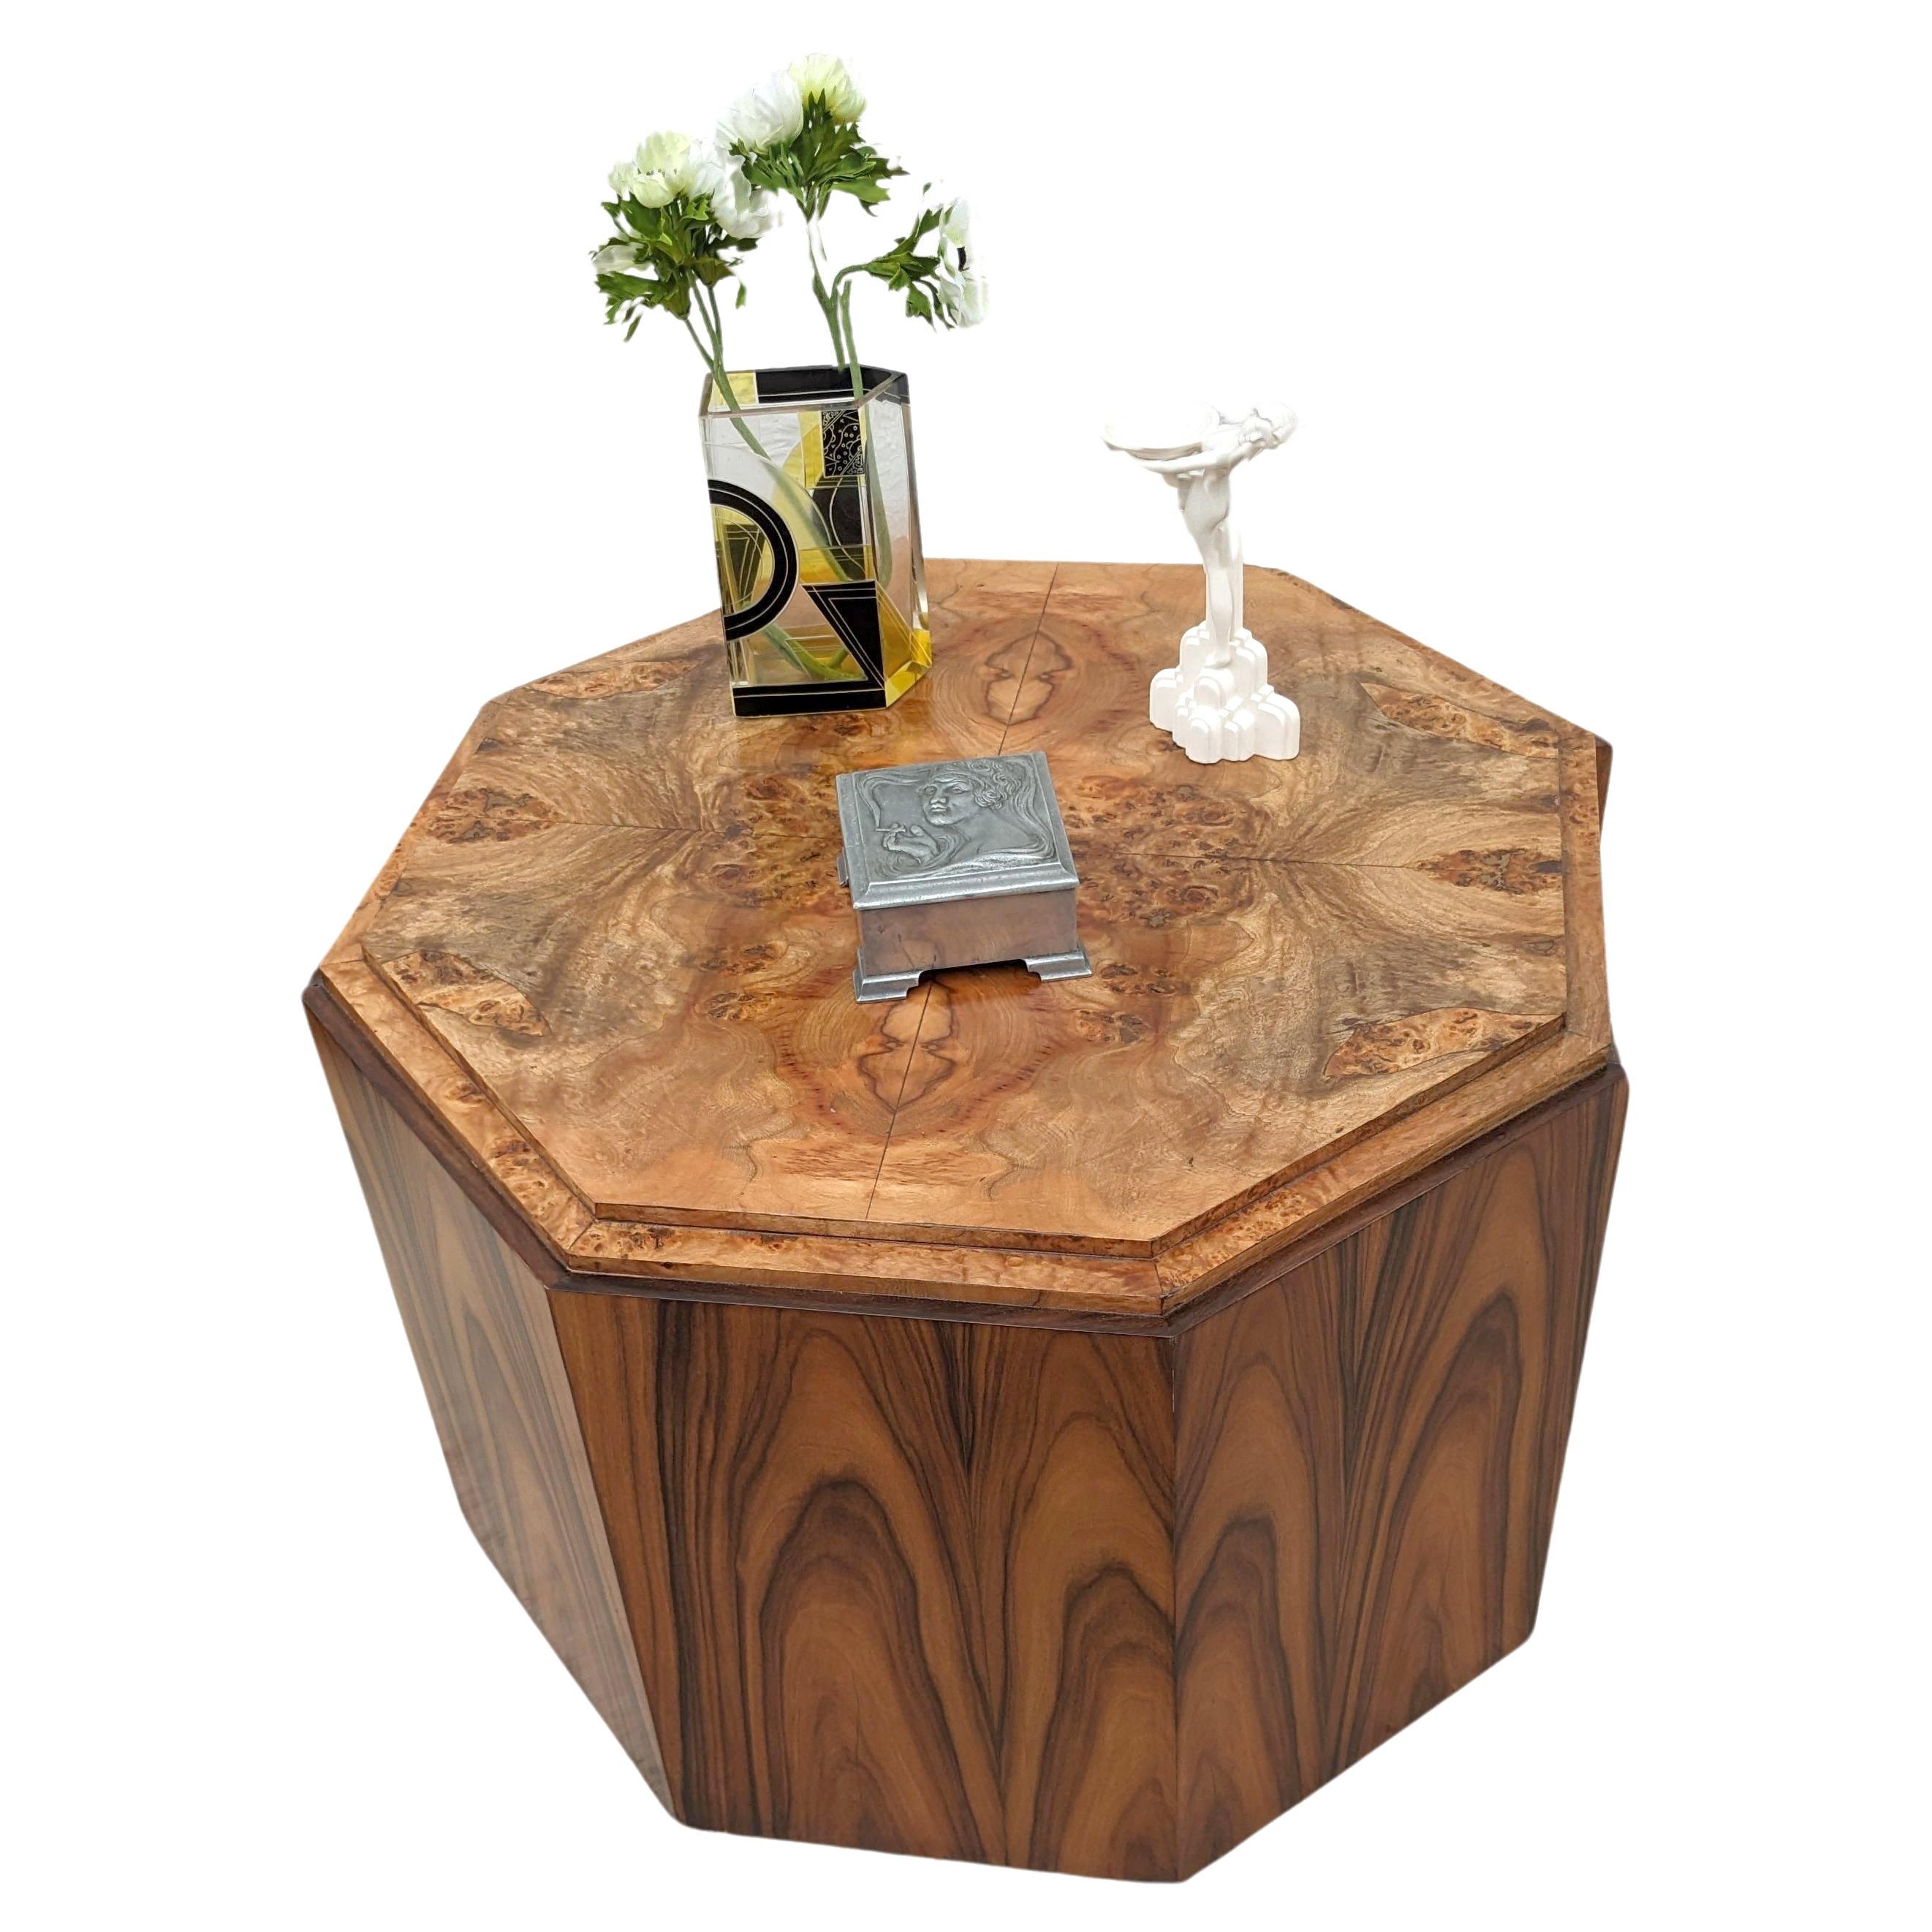 Superbly stylish and undeniable quality is this Art Deco 1930's hexagonal table. On first impressive one can't not be captivated by the veneers, the top has an intricate pattern of Walnut book paged veneers with solid panel sides of strongly figured